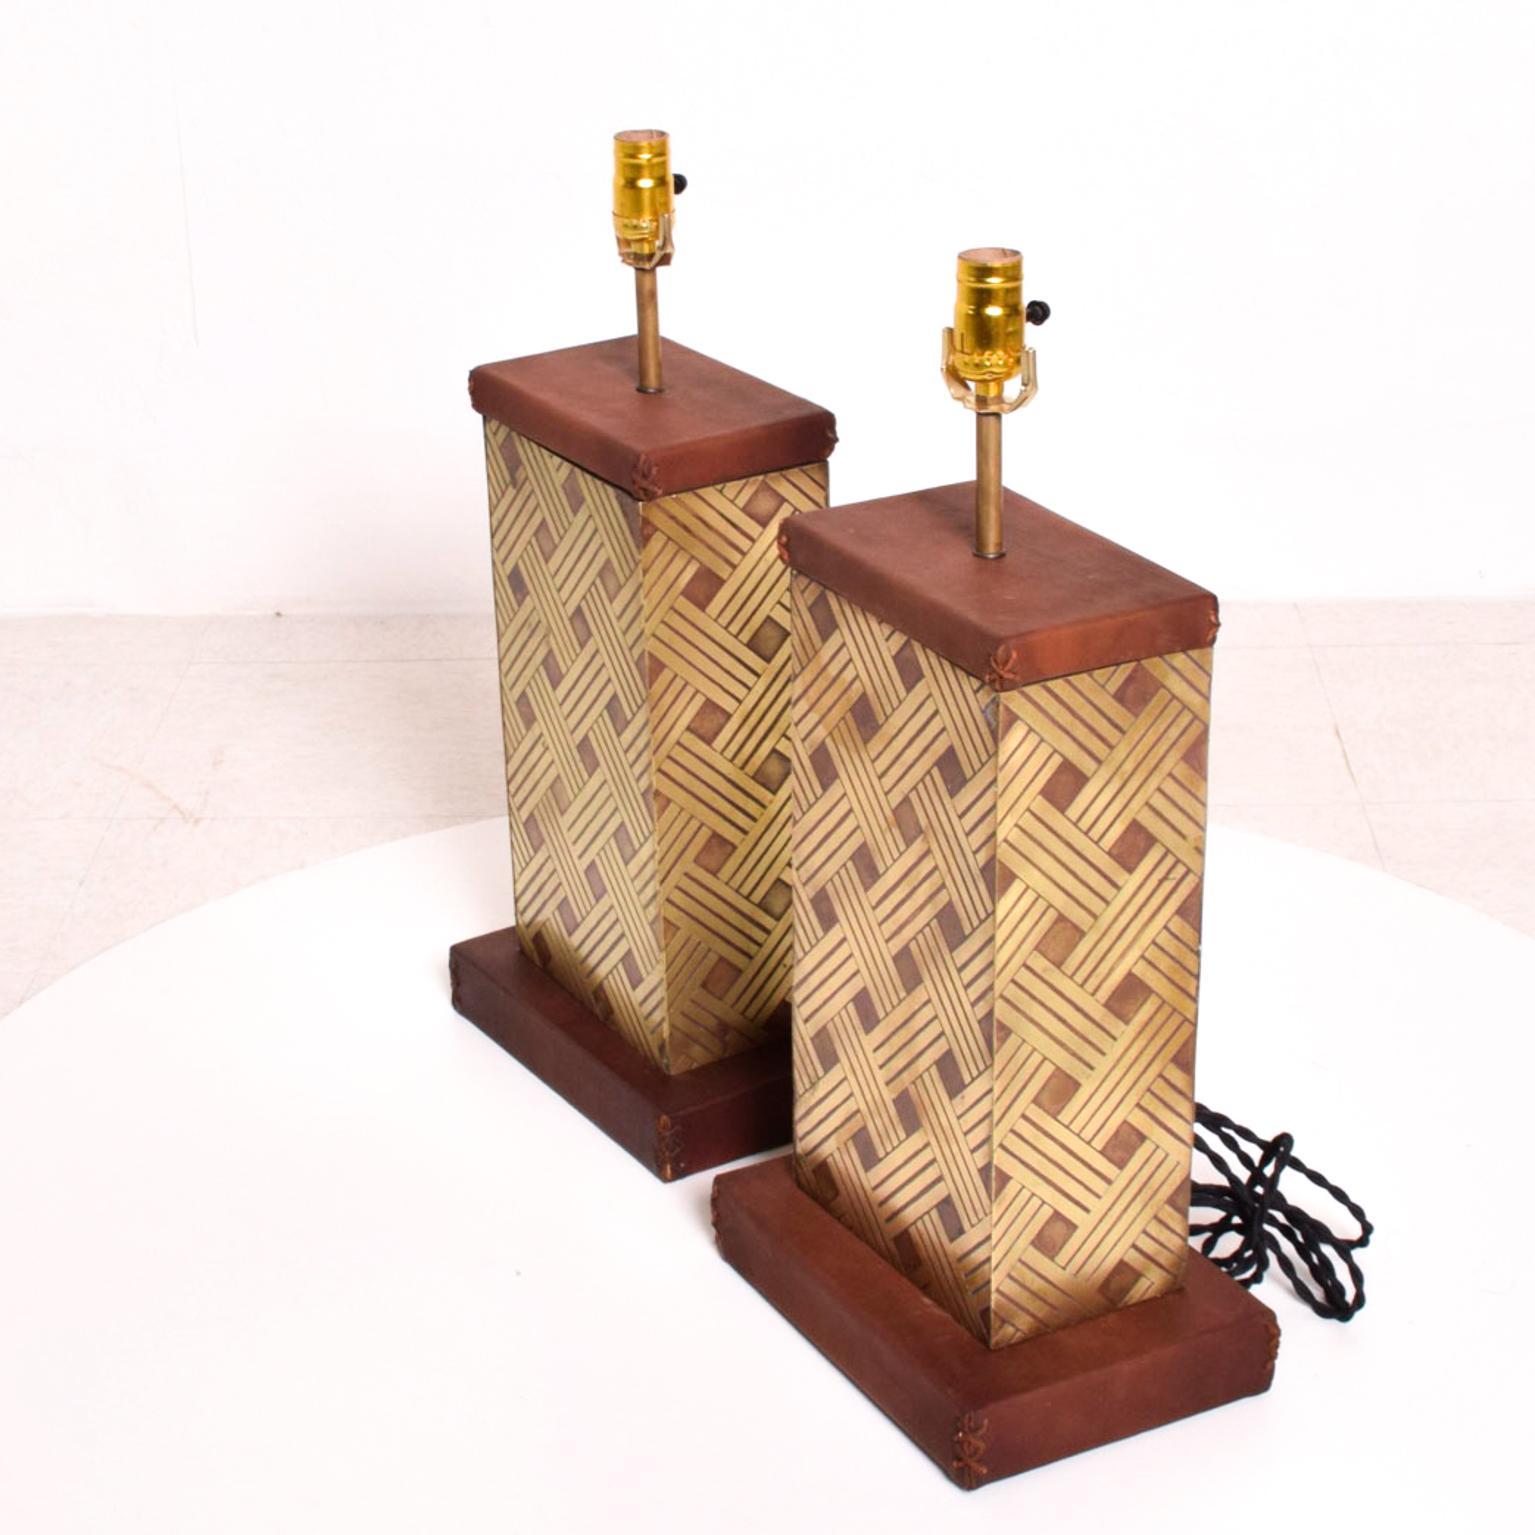 Table Lamp Pair Leather & Bronze
Pair of Midcentury Table Lamps. Geometric modernist design. 
Fabulous leather X Tie Detail.
Wood-base with saddle leather on bronze body. Bronze sheet with geometrical texture.
Made in Mexico. 1970s. Style of Luis